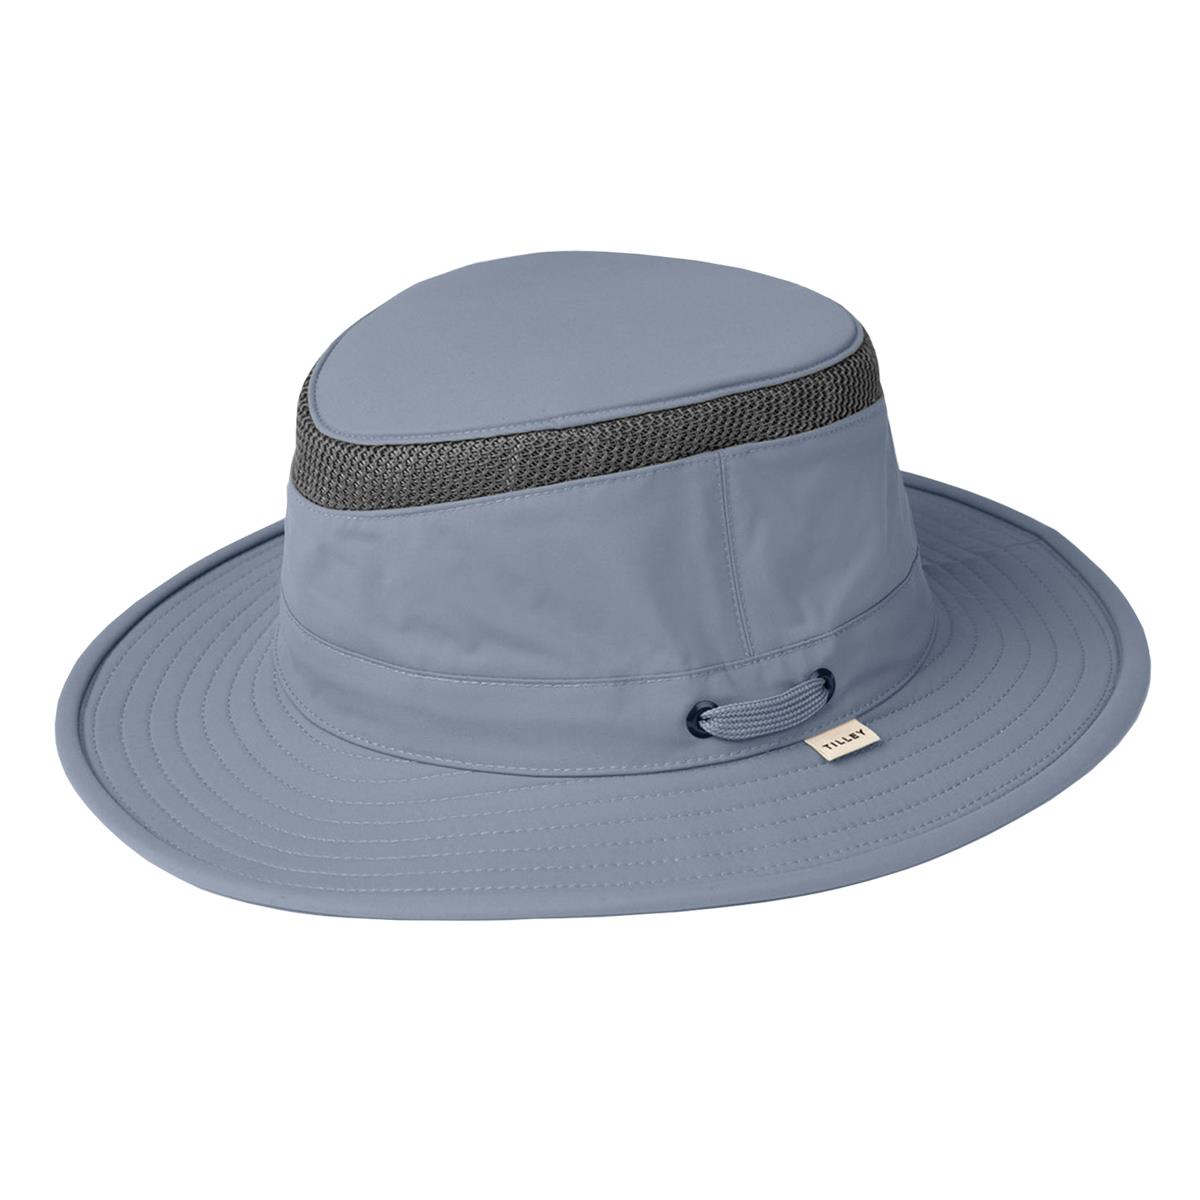 What specific purposes does the Tilley LTM5 hat suit?